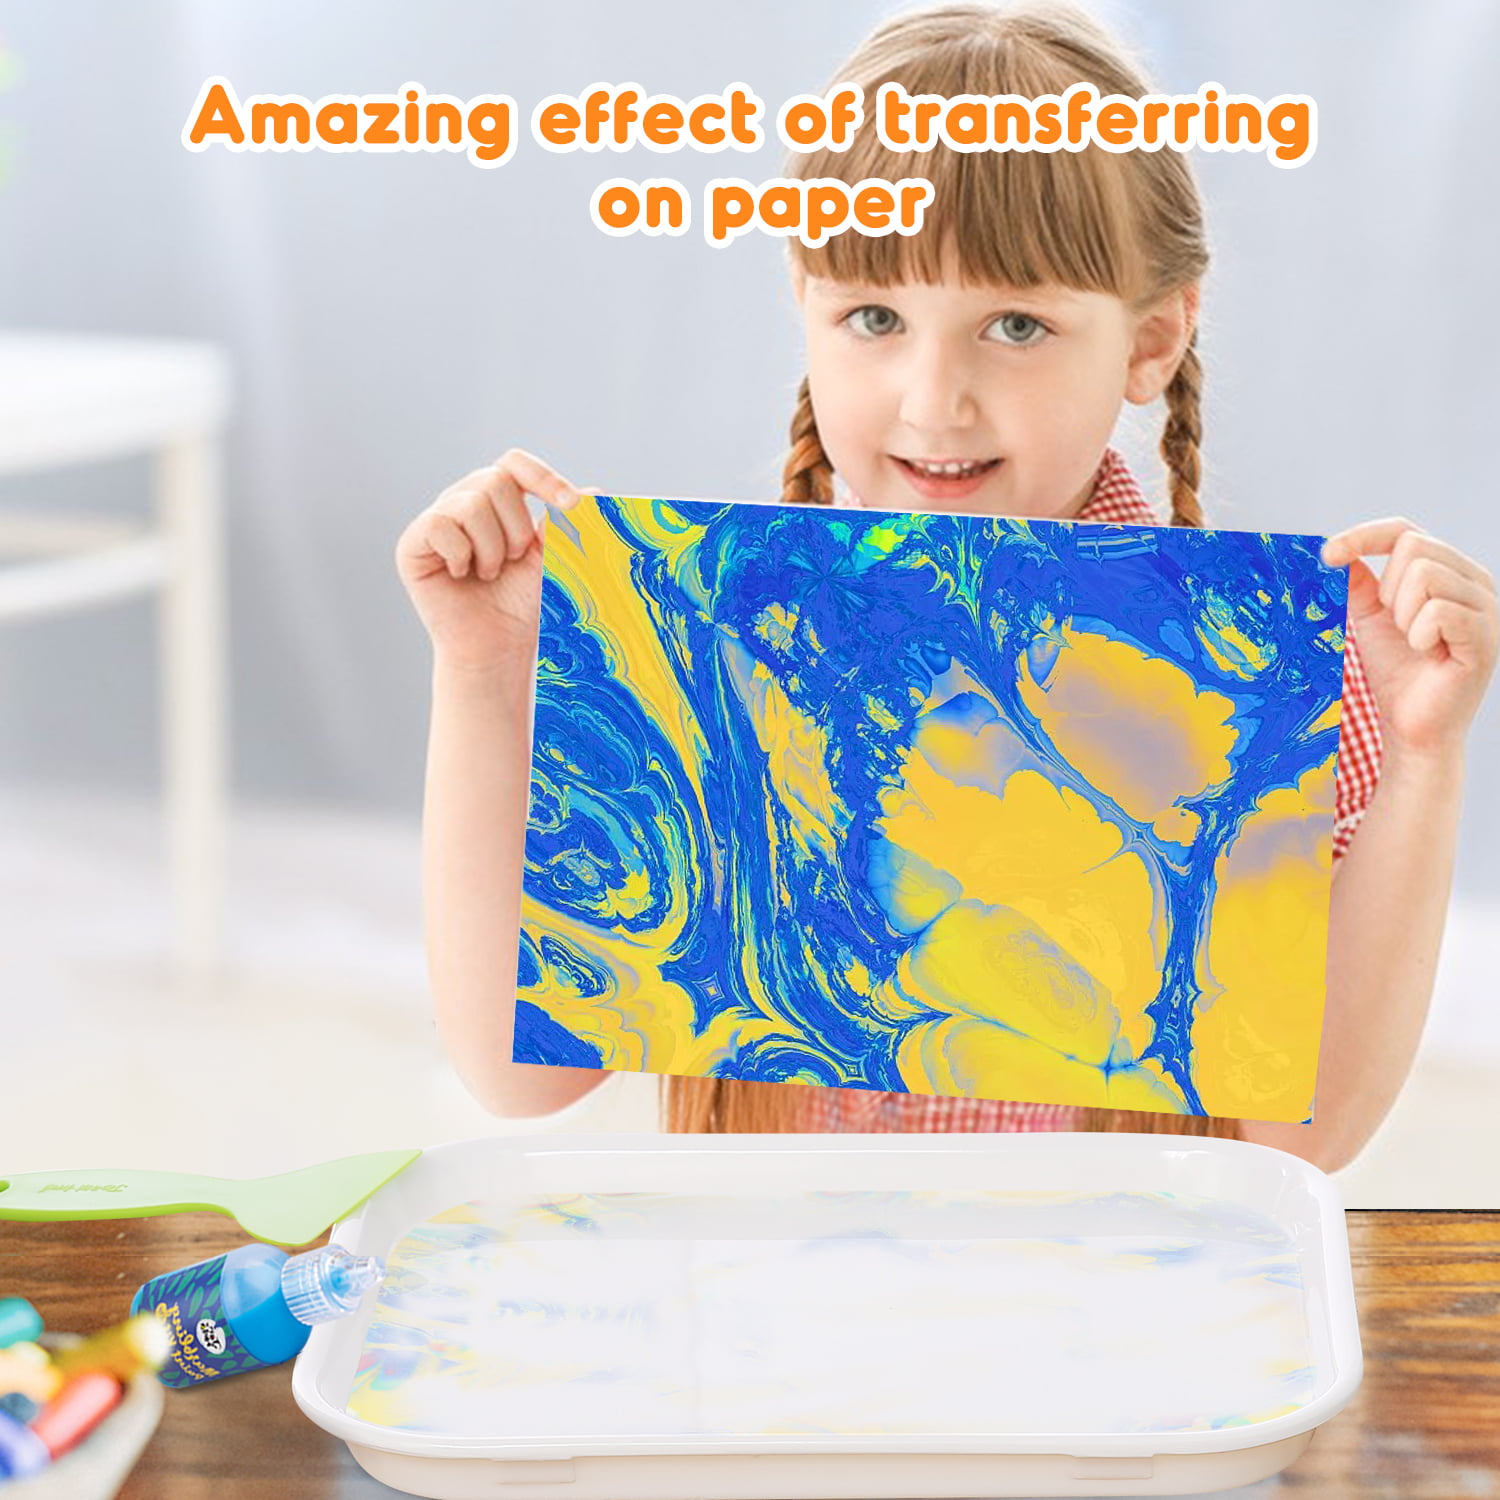 Coodoo Upgrade 12-Color Marbling Paint Arts & Crafts Gifts for Kids, A –  Soyeeglobal